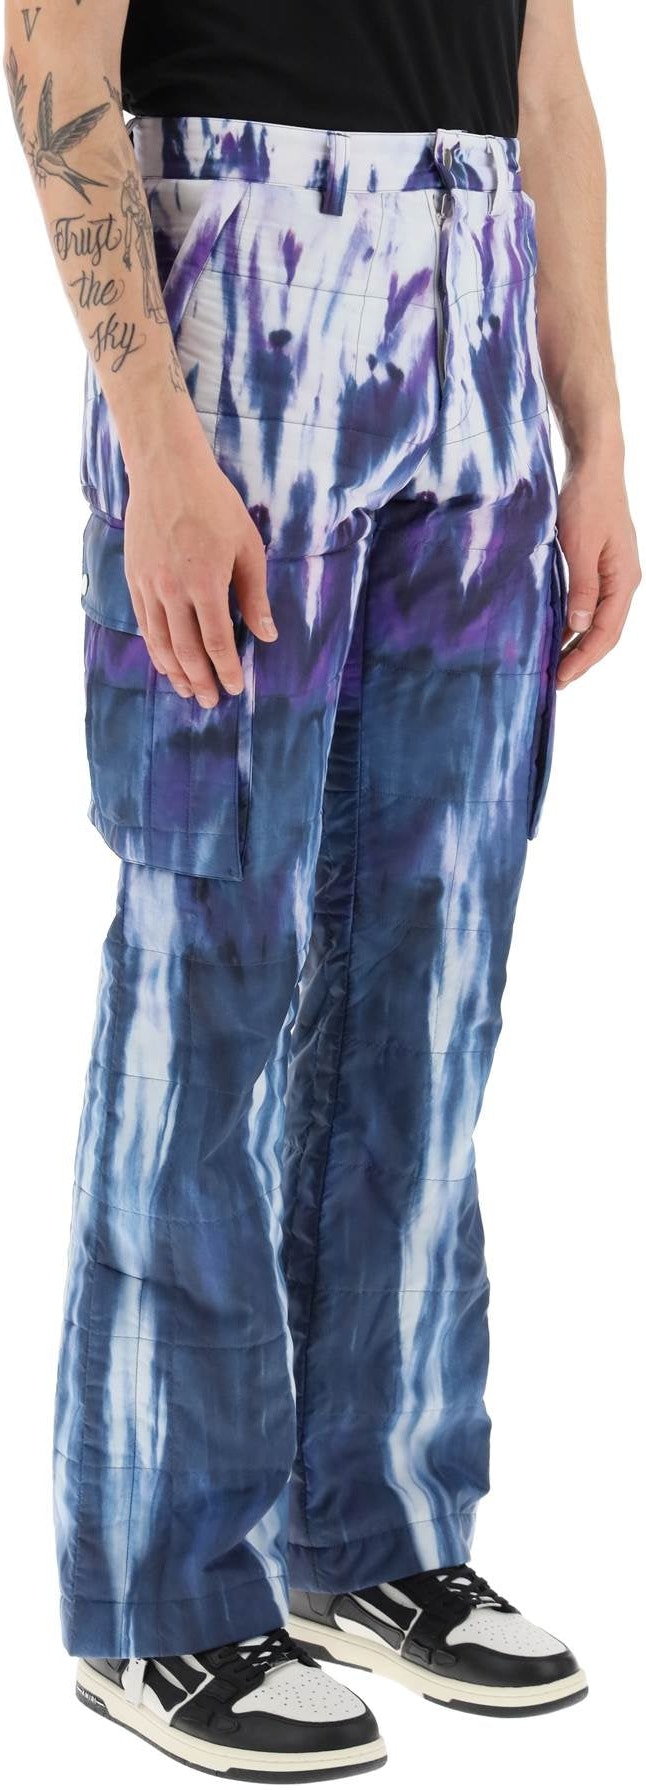 Amiri - Cargo Quilted Pants - Blue, Purple, White